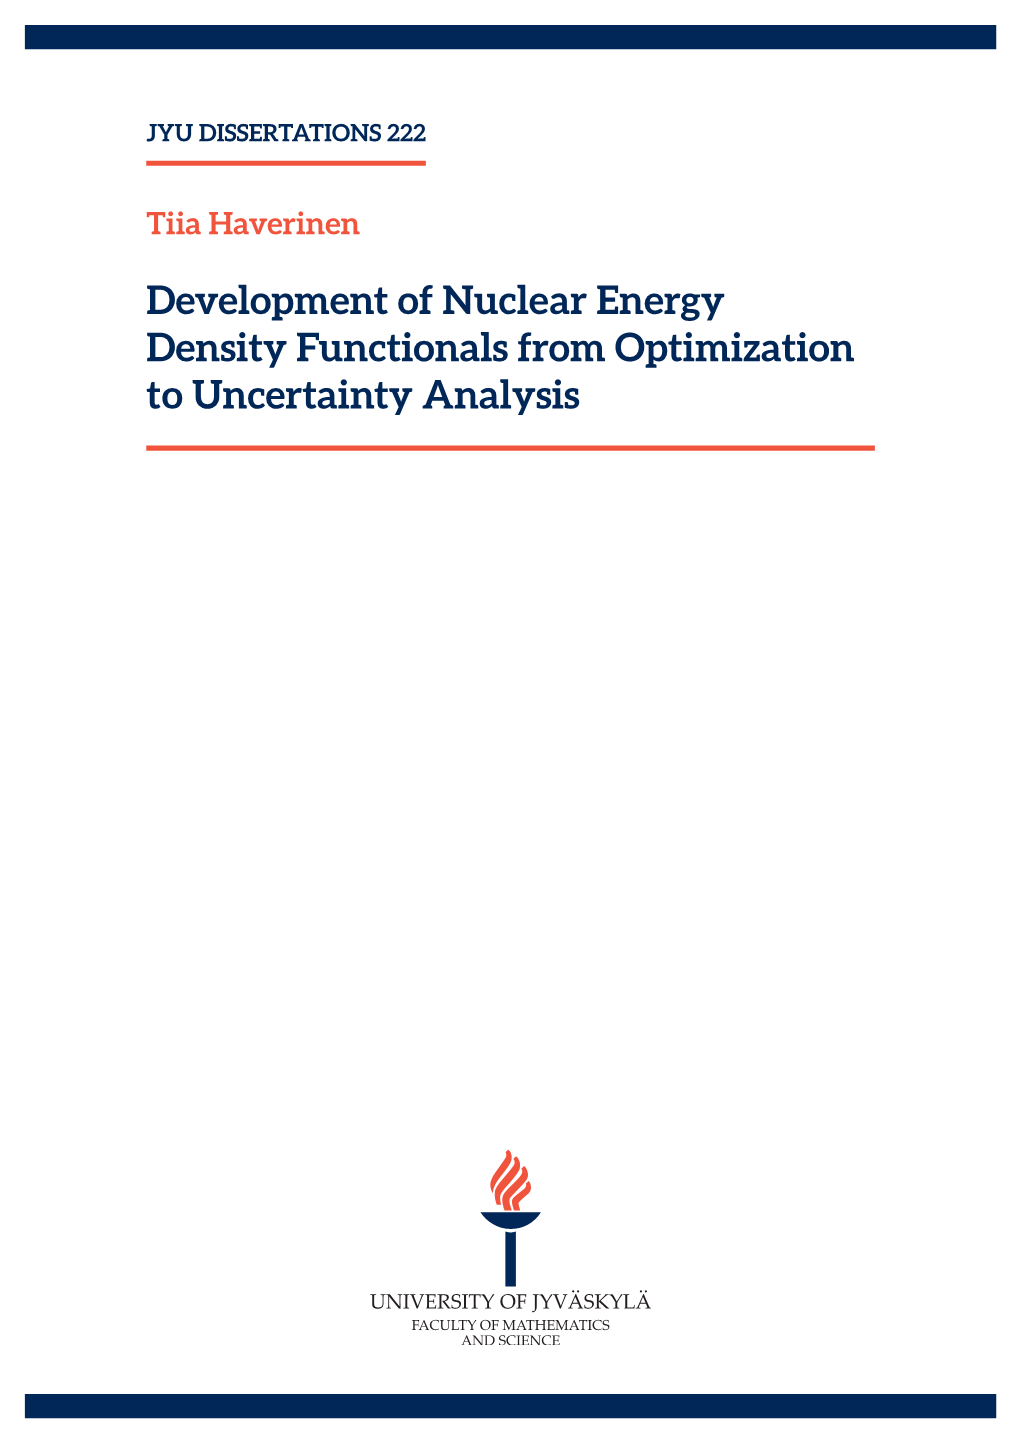 Development of Nuclear Energy Density Functionals from Optimization to Uncertainty Analysis JYU DISSERTATIONS 222